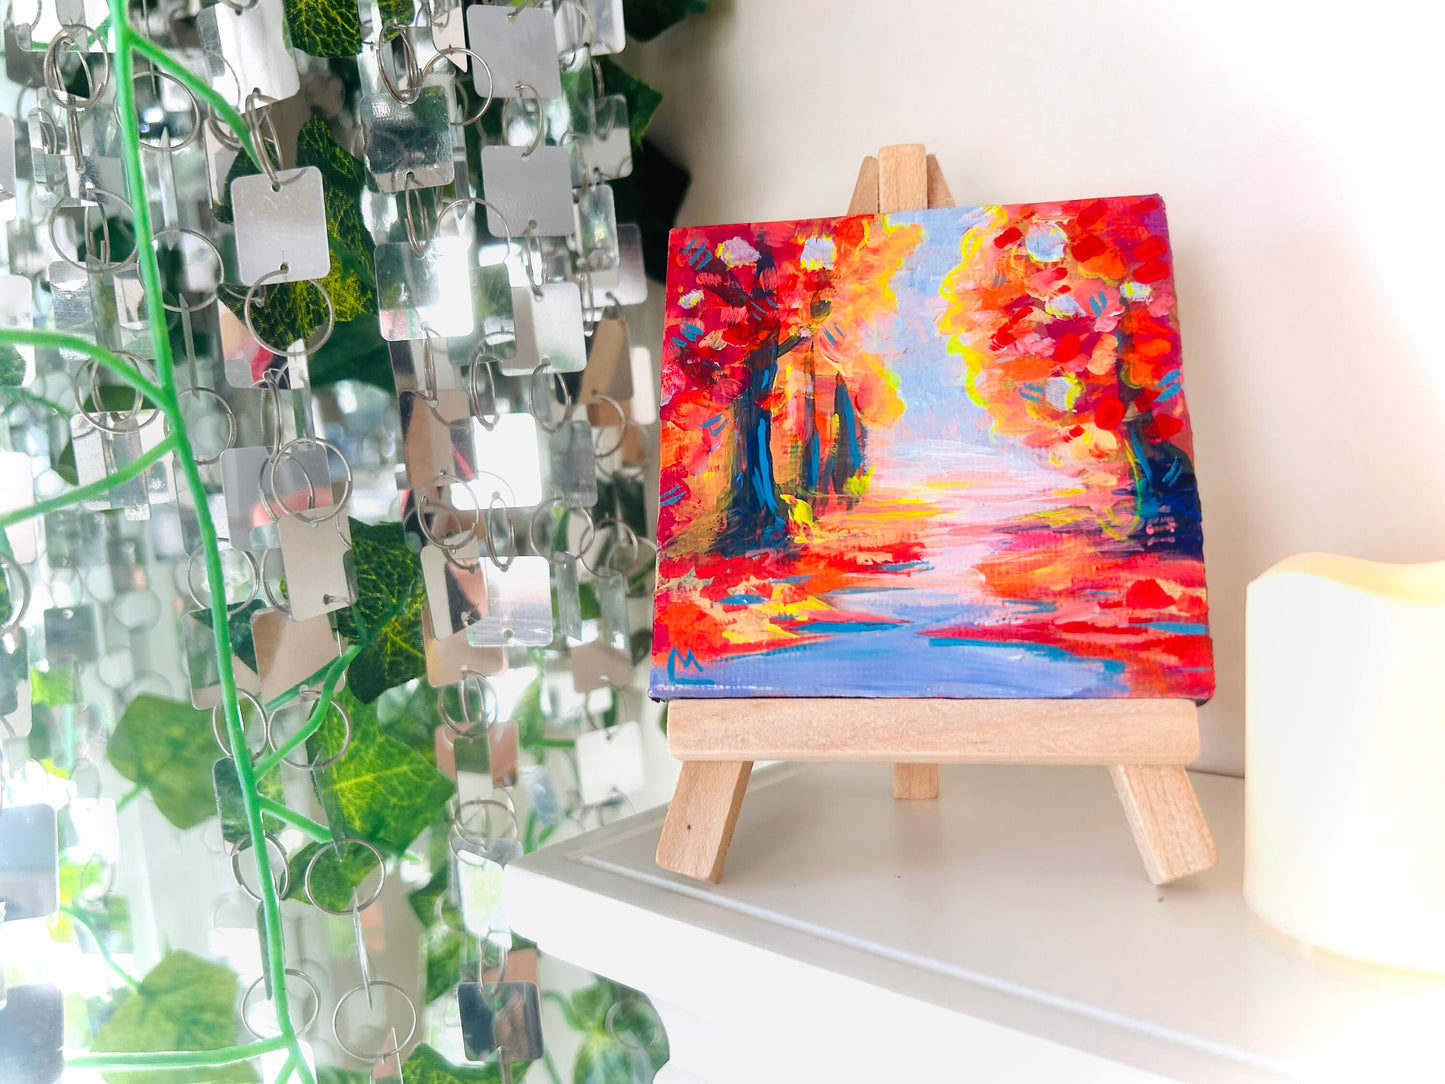 Enchanted Fall Autumn Forest Handmade Mini Canvas Painting with Stand | Funky Nature Landscape